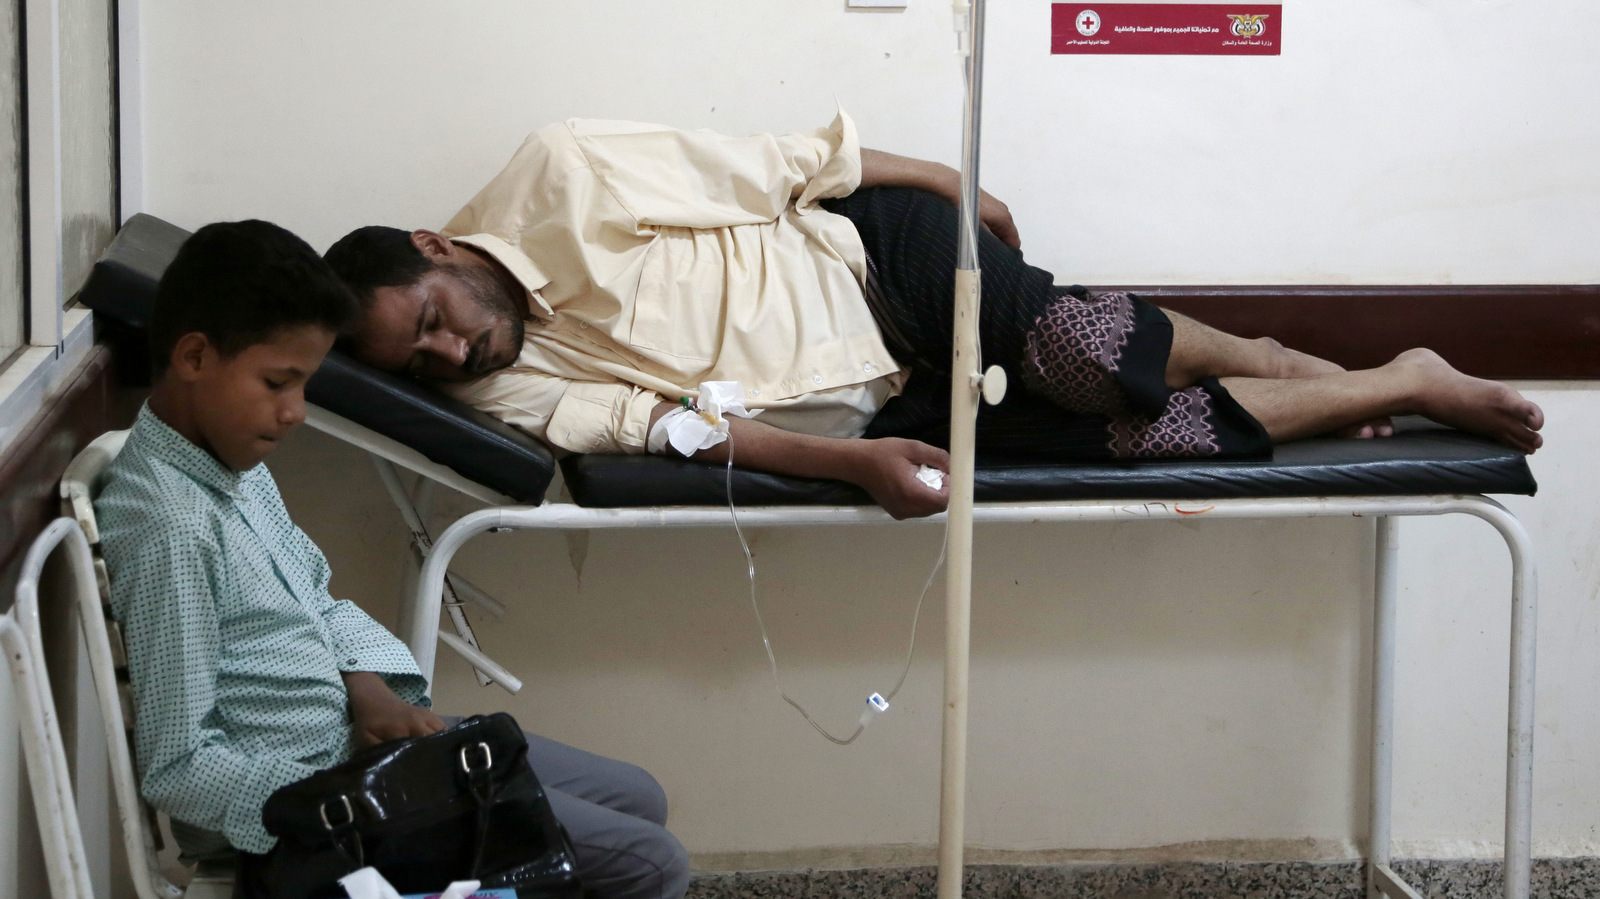 A man is treated for suspected cholera infection at a hospital in Sanaa, Yemen. Hani Mohammed | AP